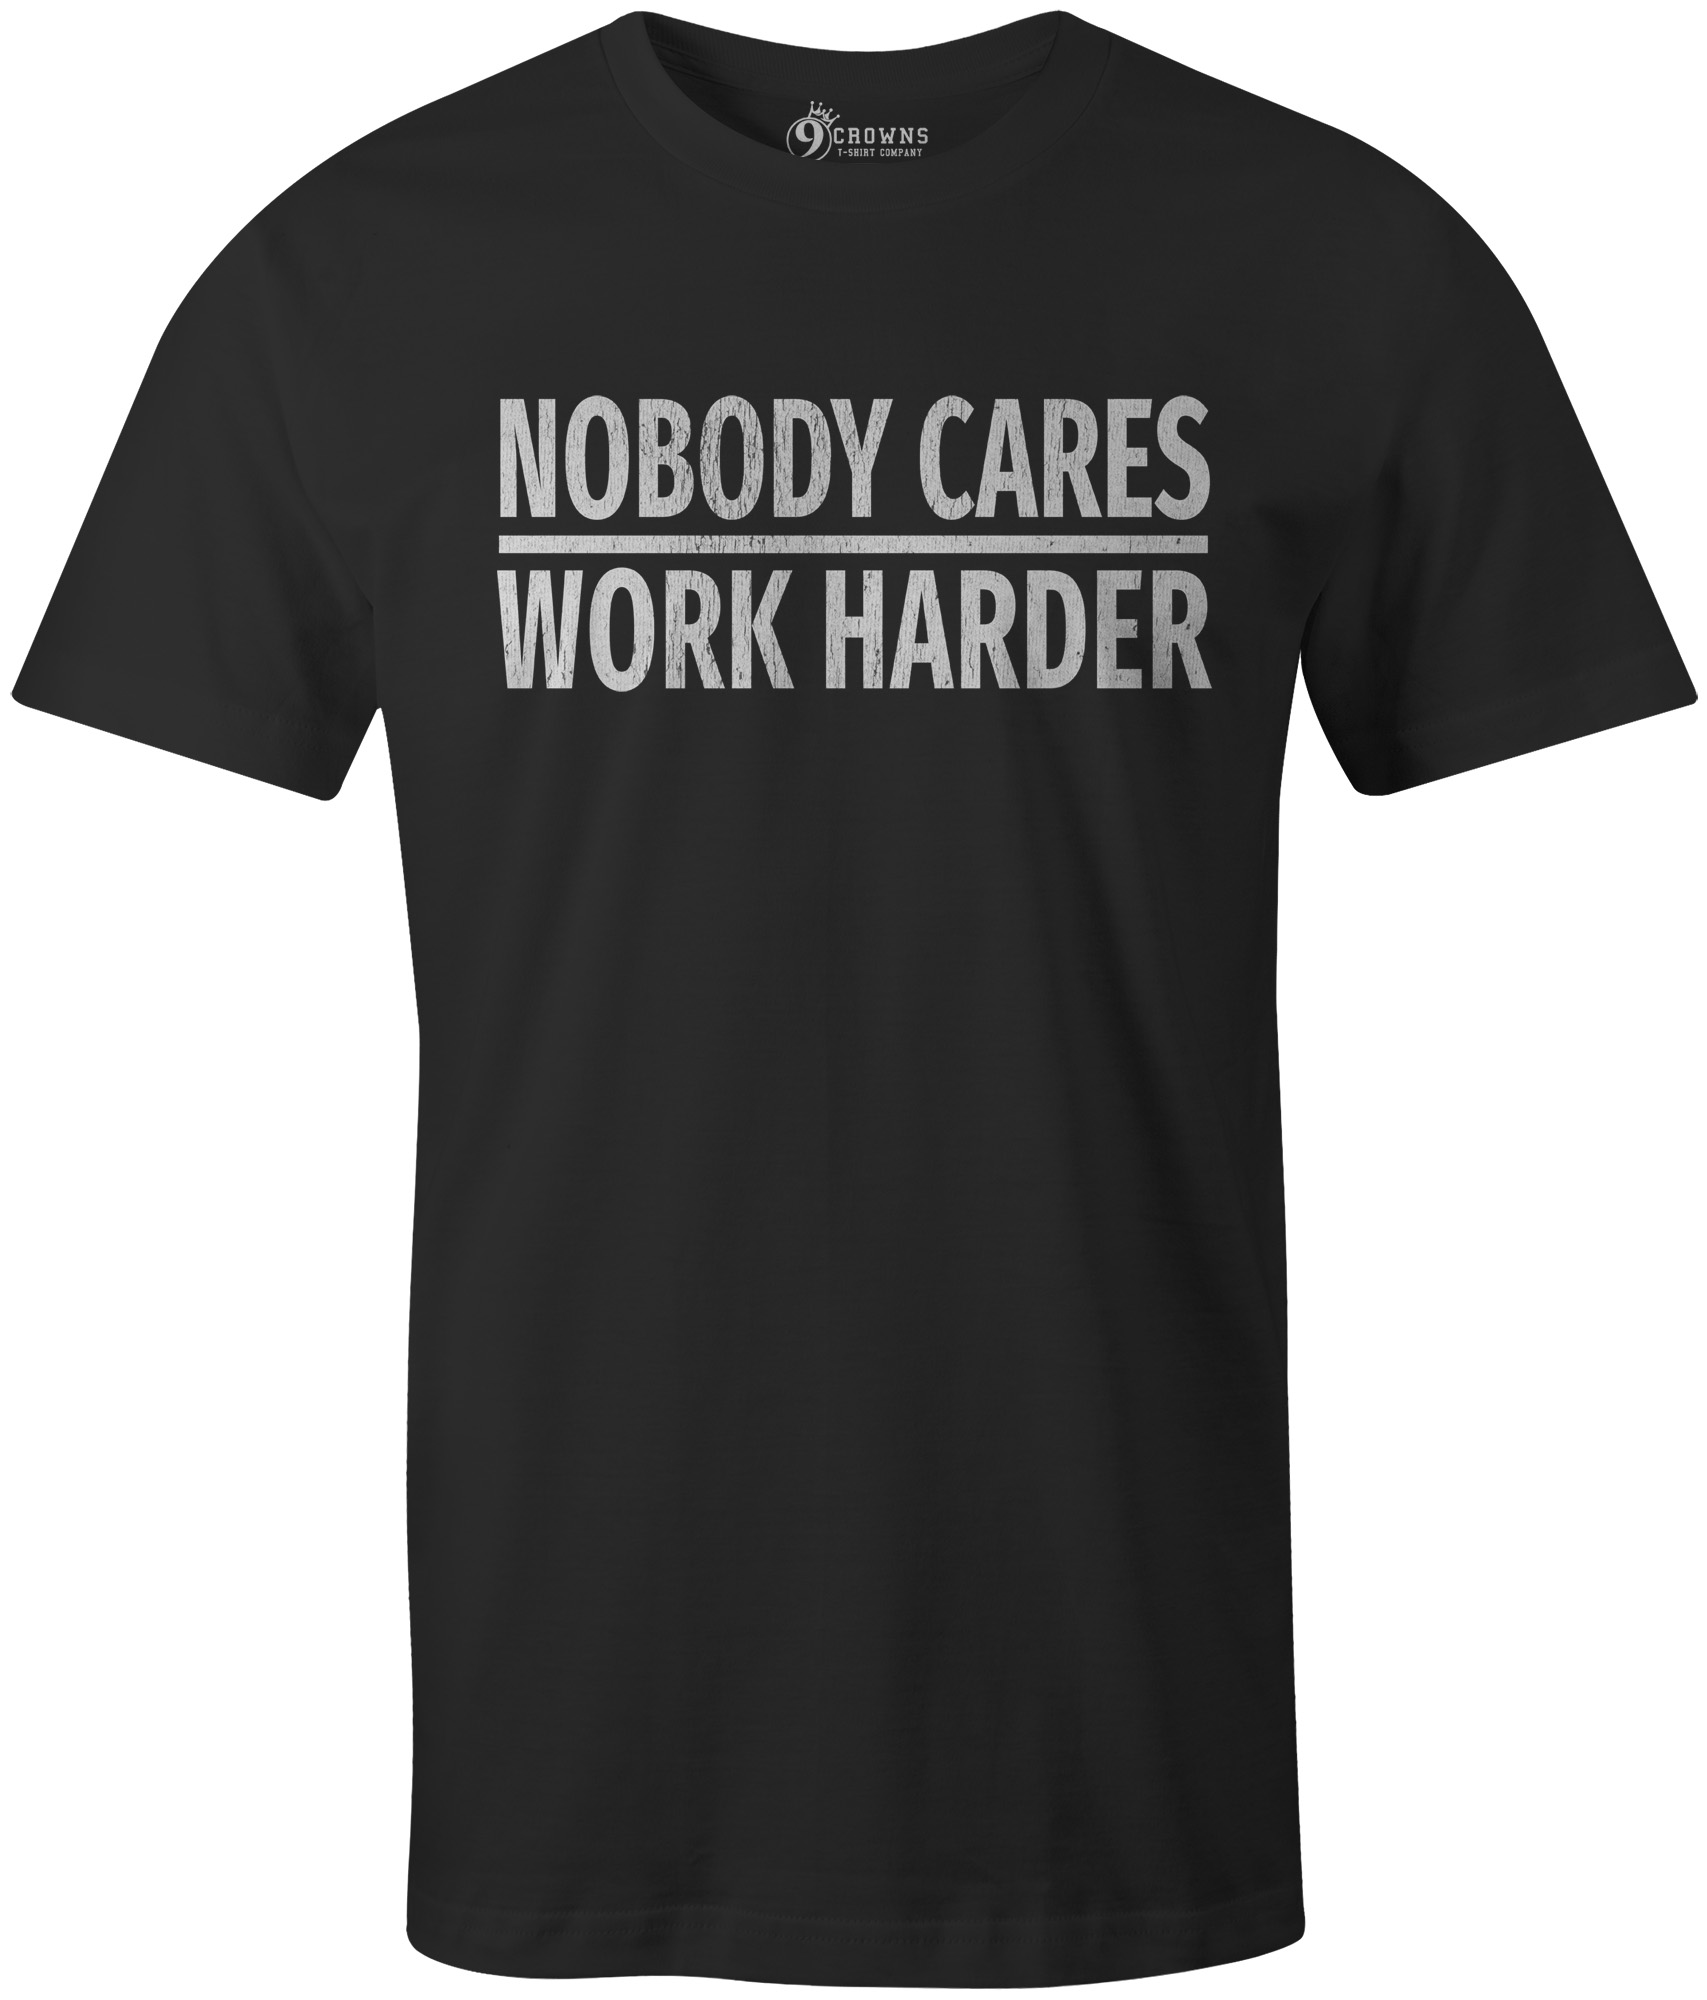 9 Crowns Tees Nobody Cares Work Harder Funny Grumpy Graphic T-Shirt | eBay